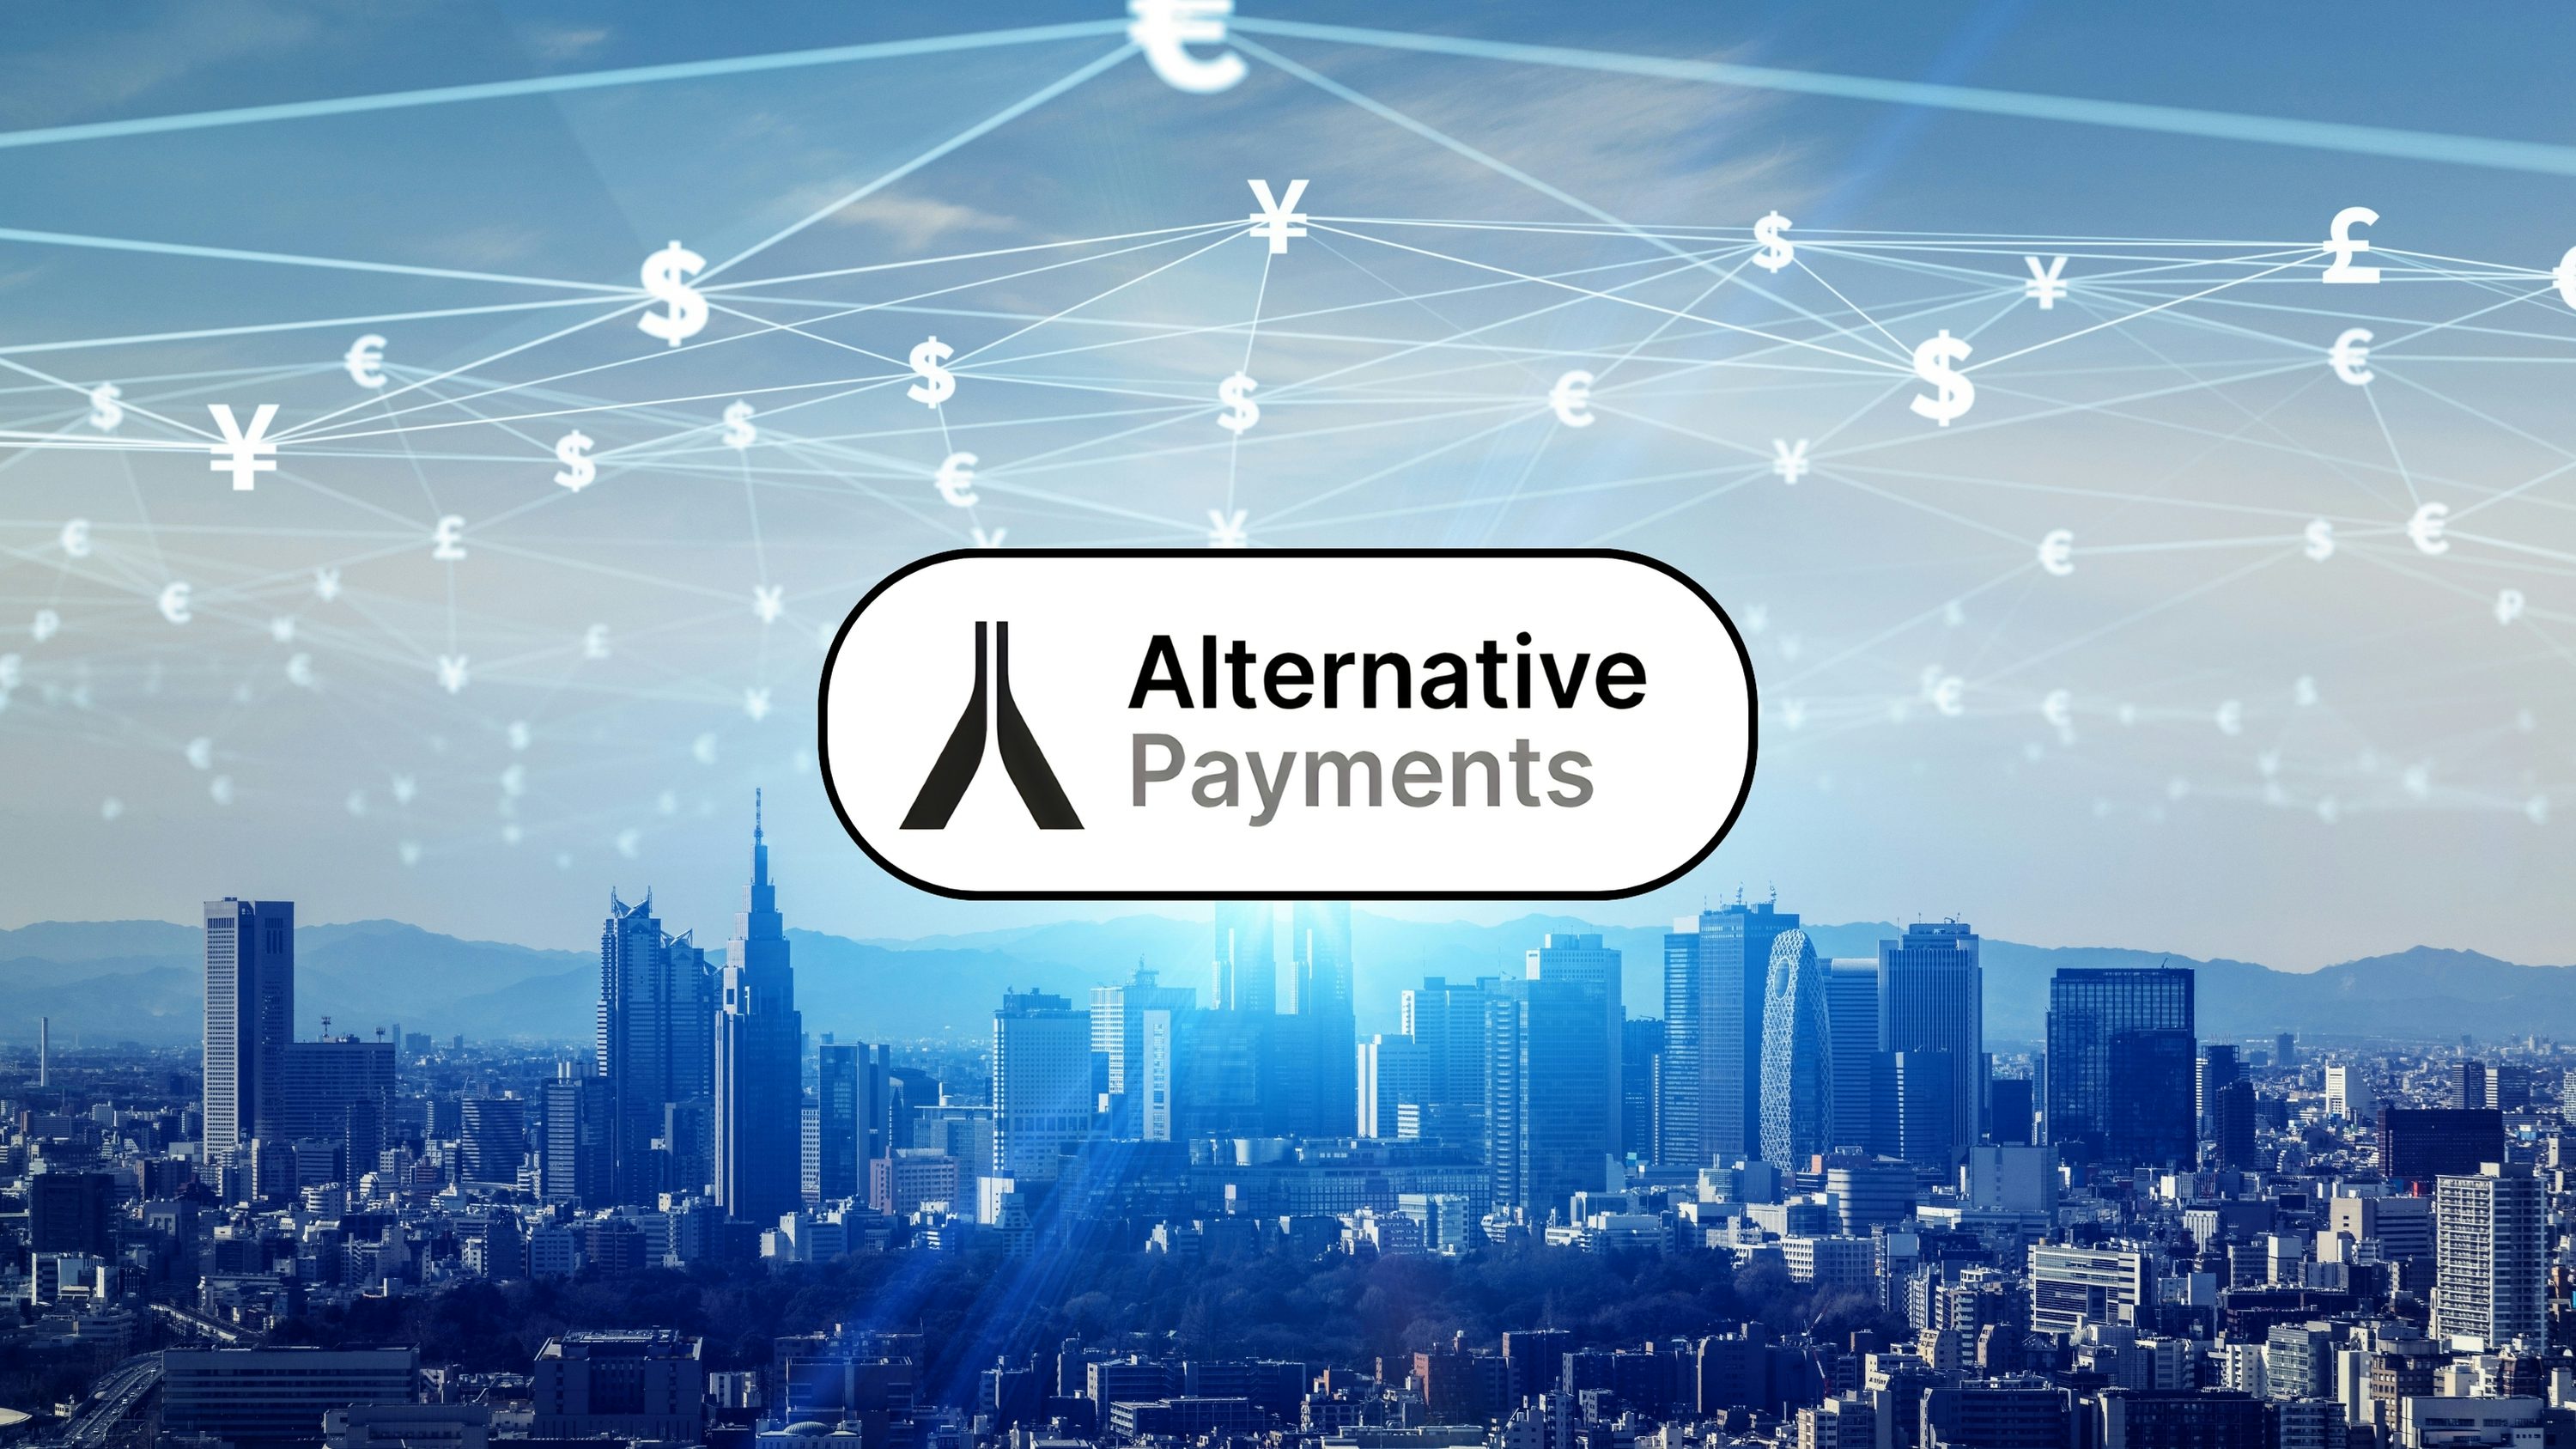 The Alternative Guide To Accounting Terms by Alternative Payments. Digital network of currency symbols over a city skyline with the logo of Alternative Payments in the center of the image, protruding out from a beam of light. The imagery is evoking a paradigm of enlightenment that can be interpreted as being achievable through Alternative Payments with how it's where the light is sourced from.